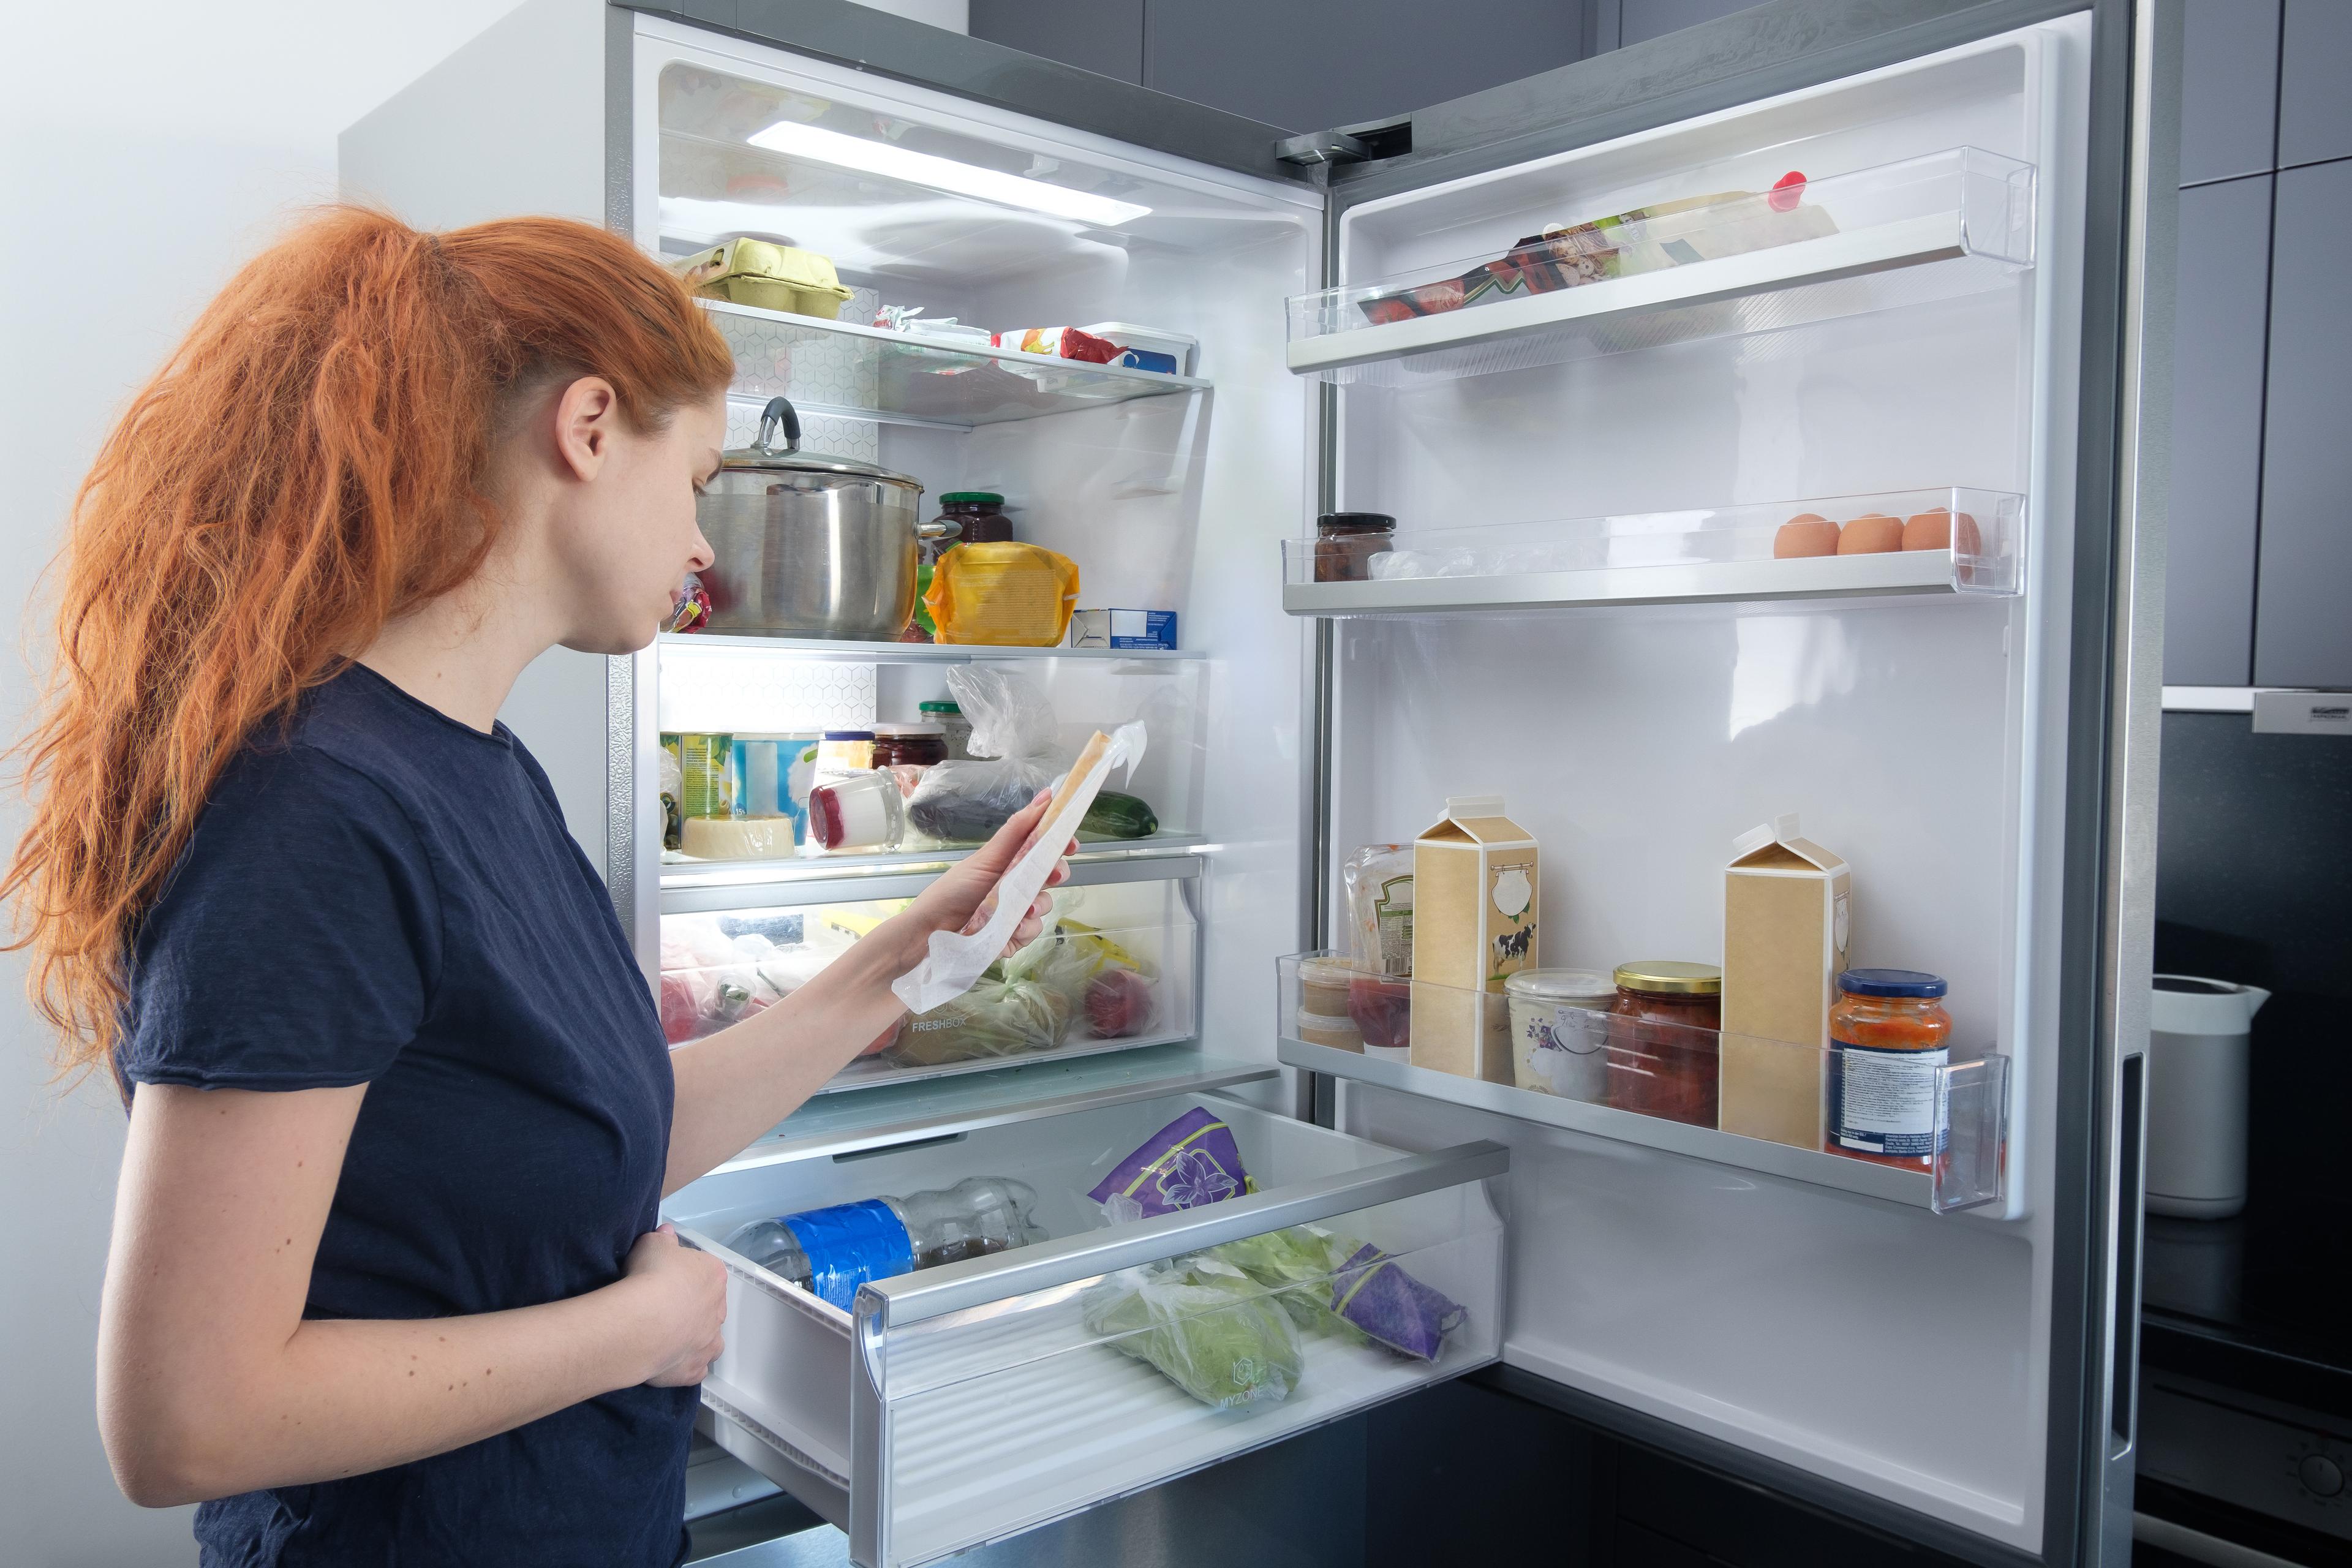 A woman looks in a refrigerator.